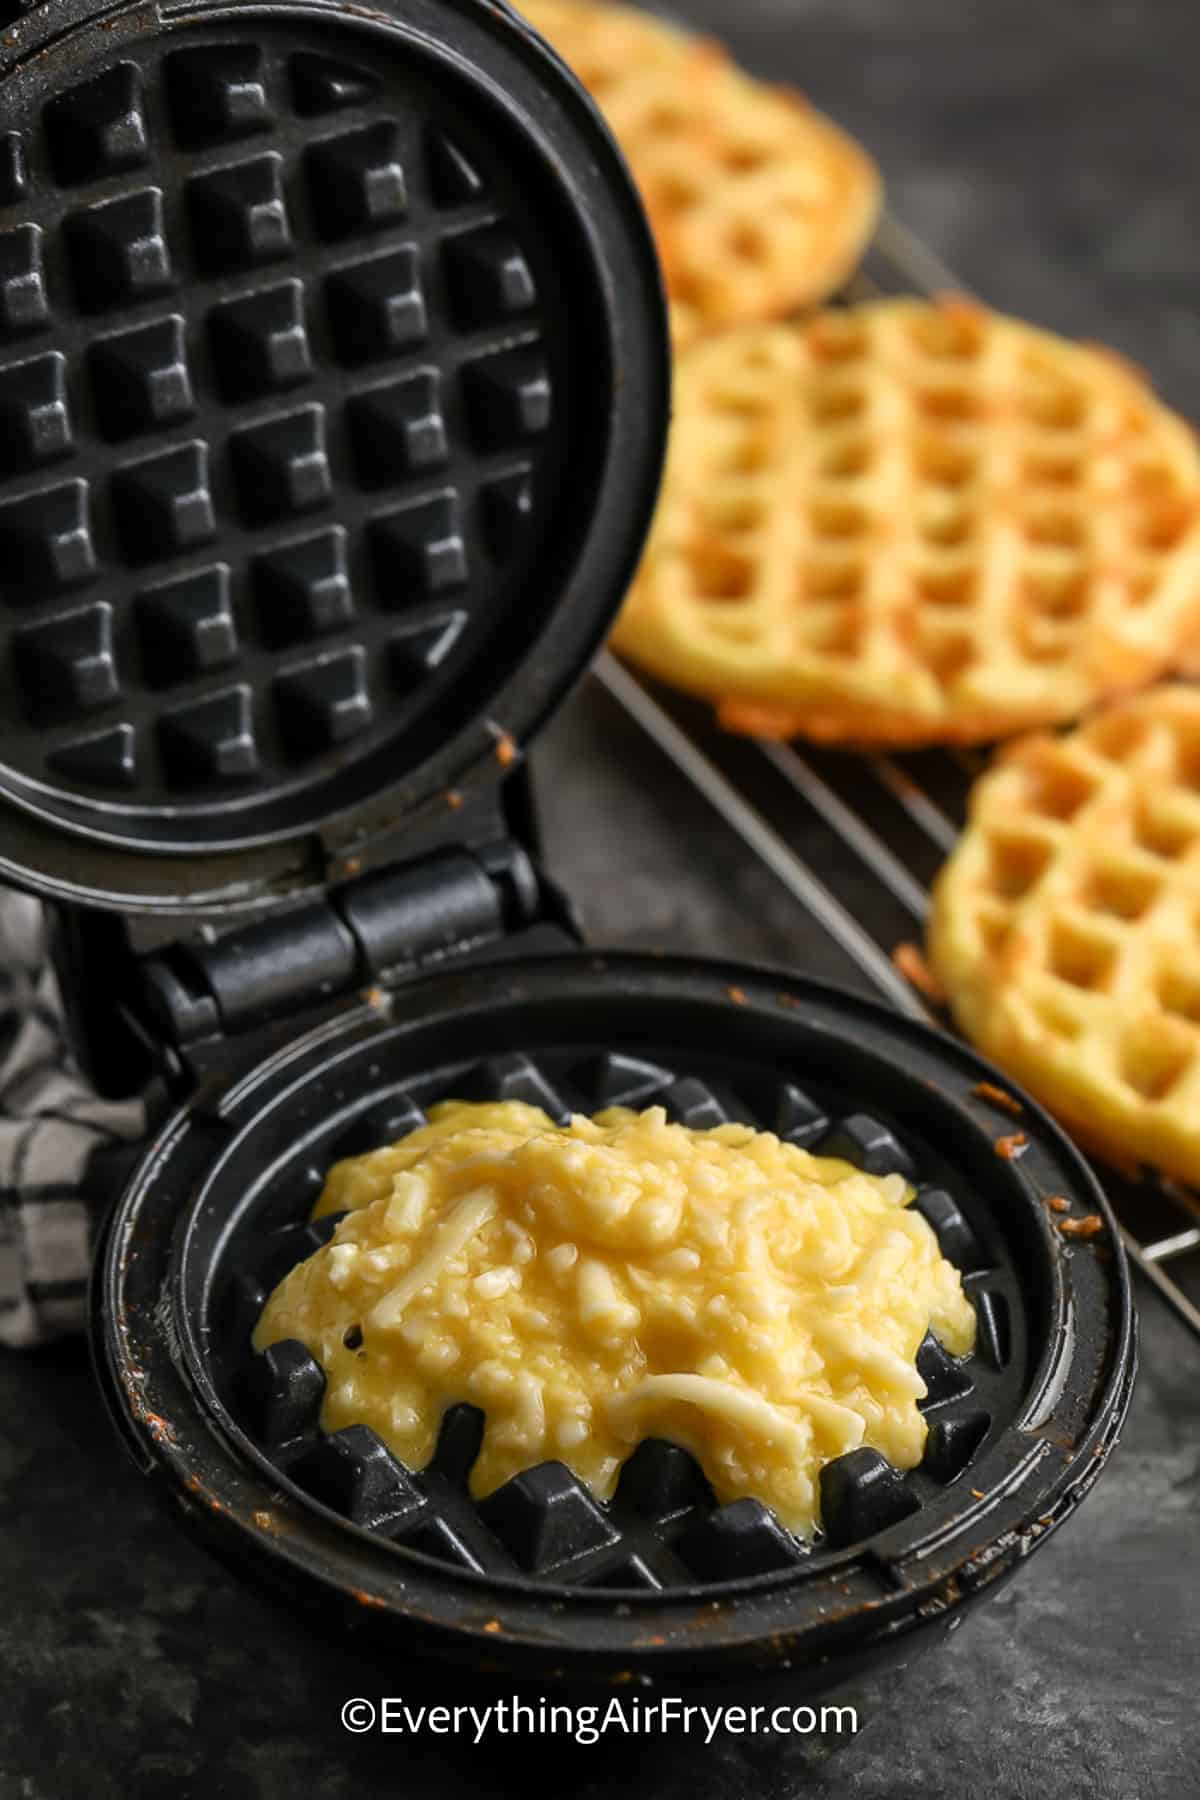 Chaffles mixture poured into a waffle iron